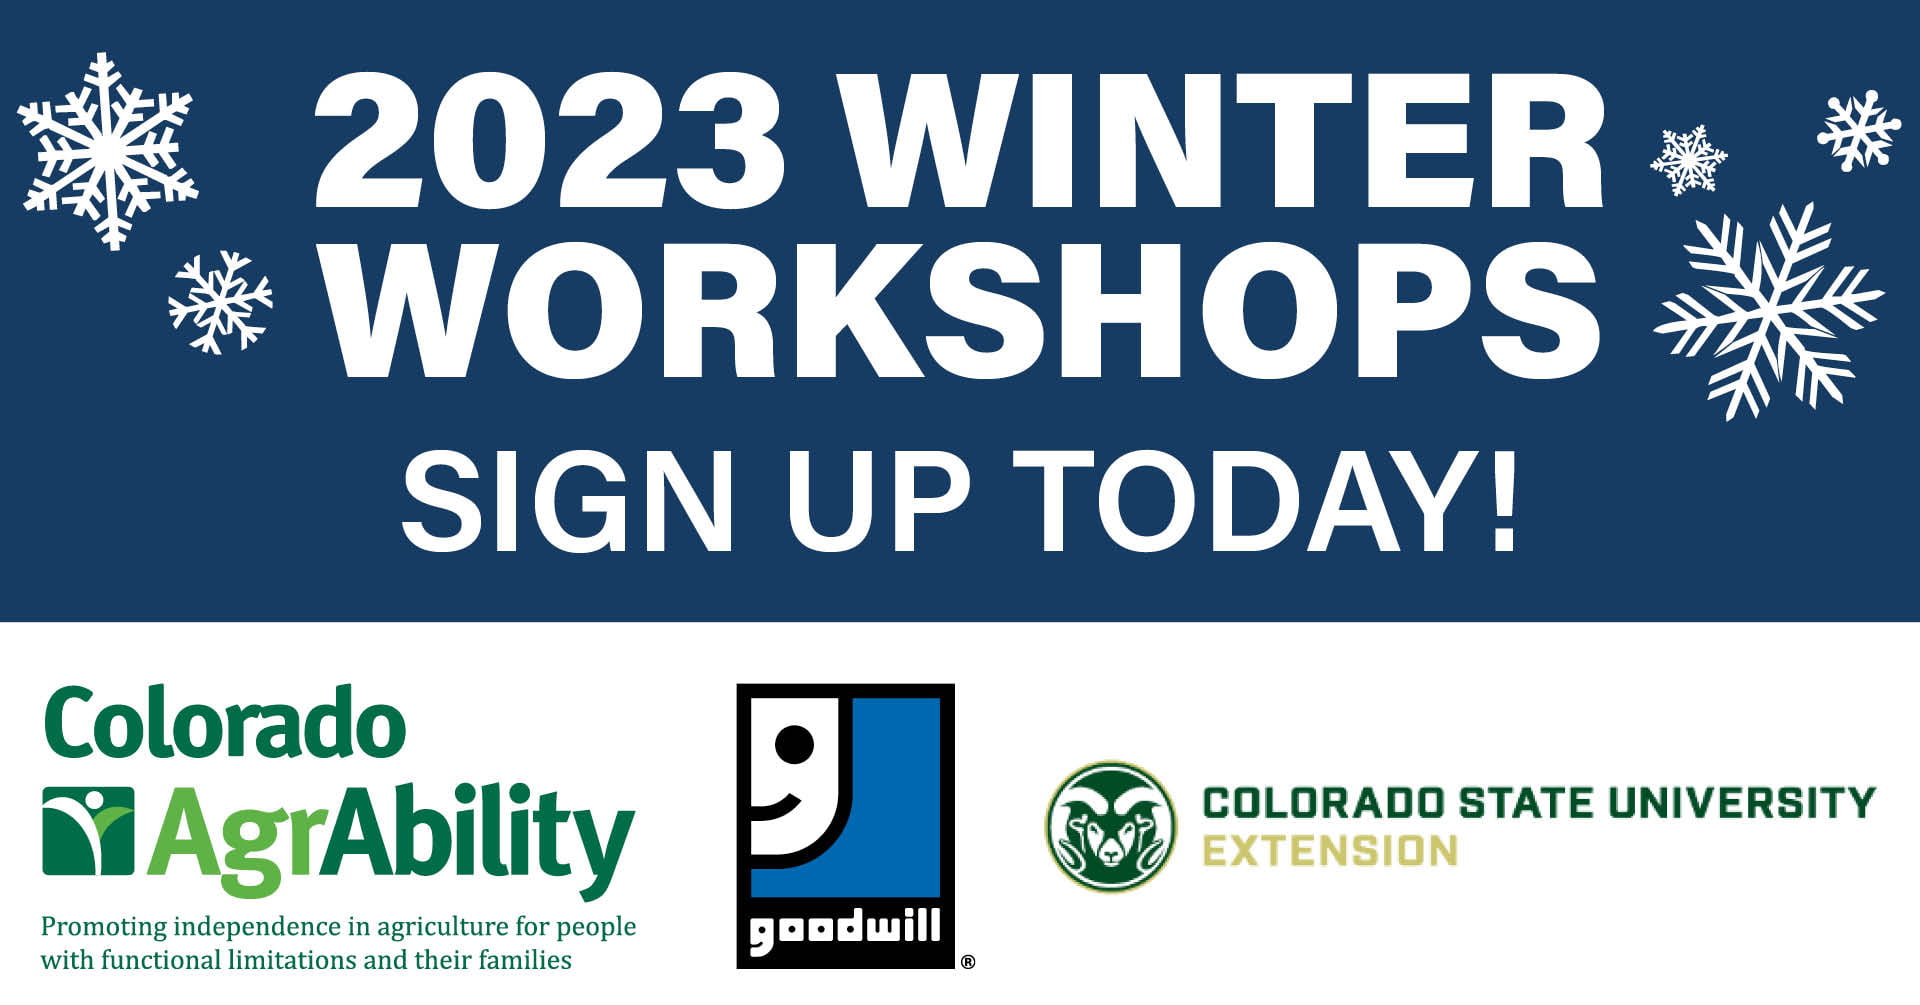 2023 AgrAbility Winter Workshops sign up today